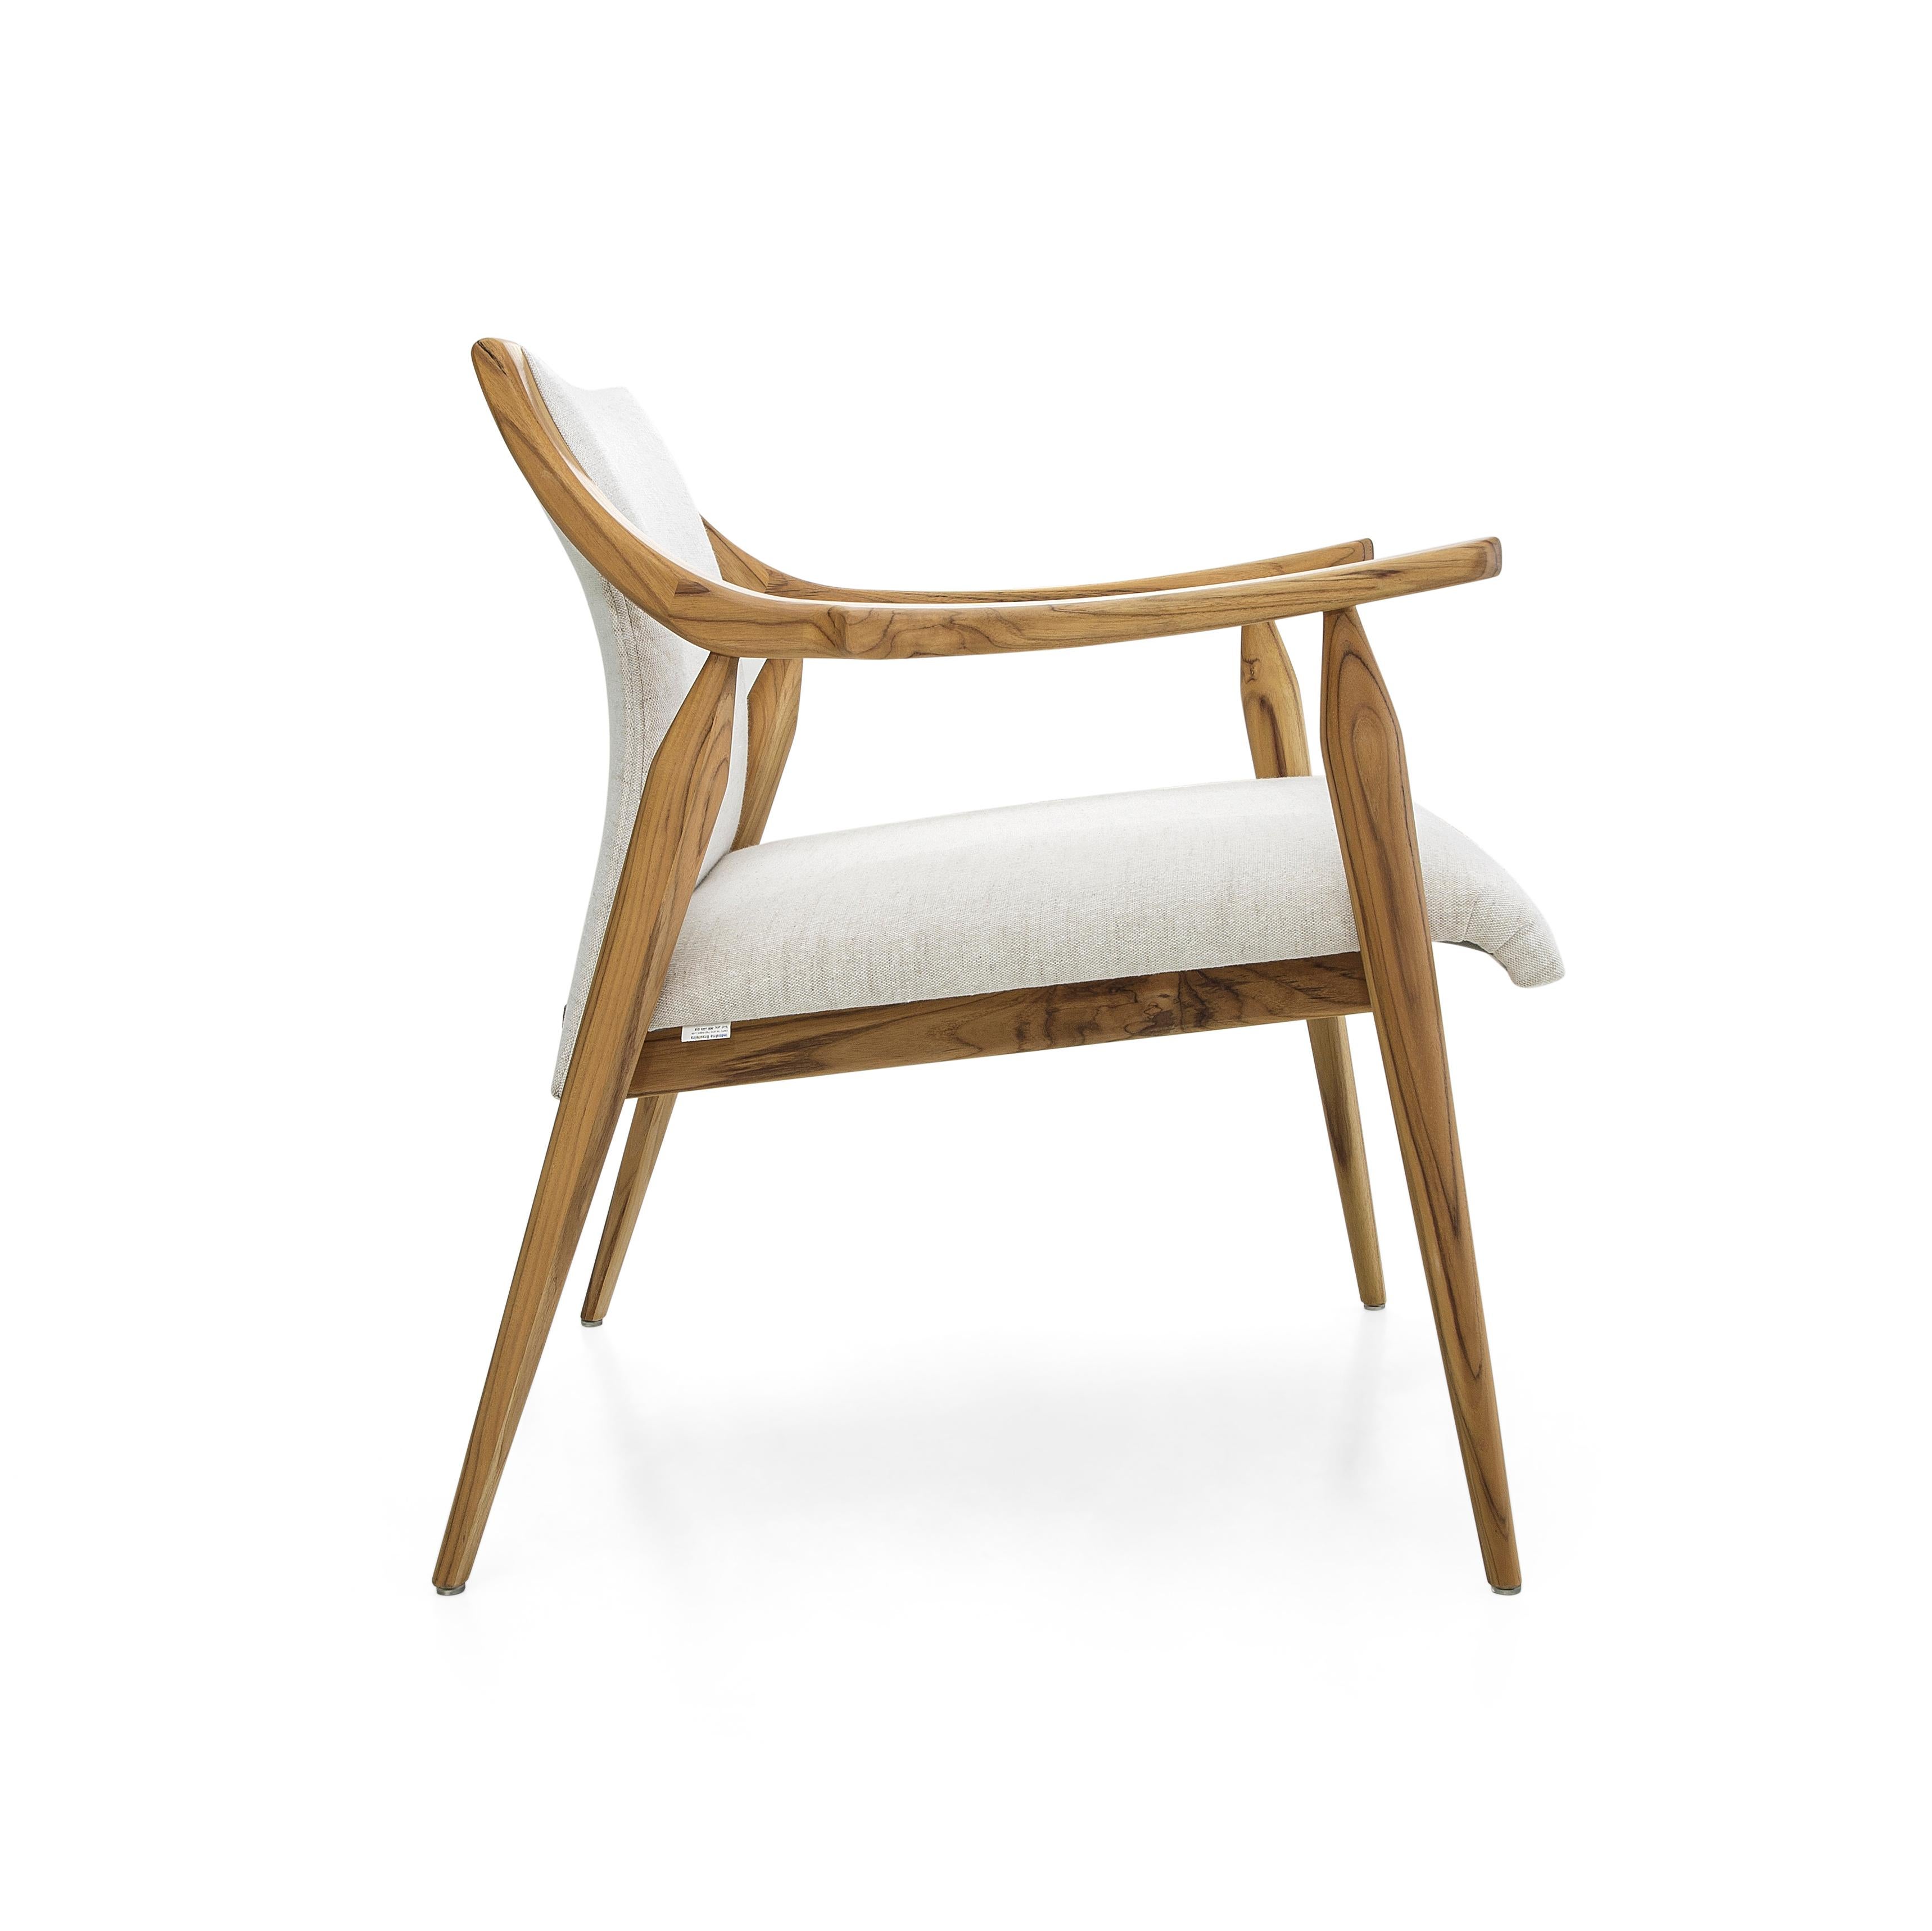 Upholstery Mince Armchair Featuring Curved Arms and Spindle Legs in Teak Wood Finish For Sale